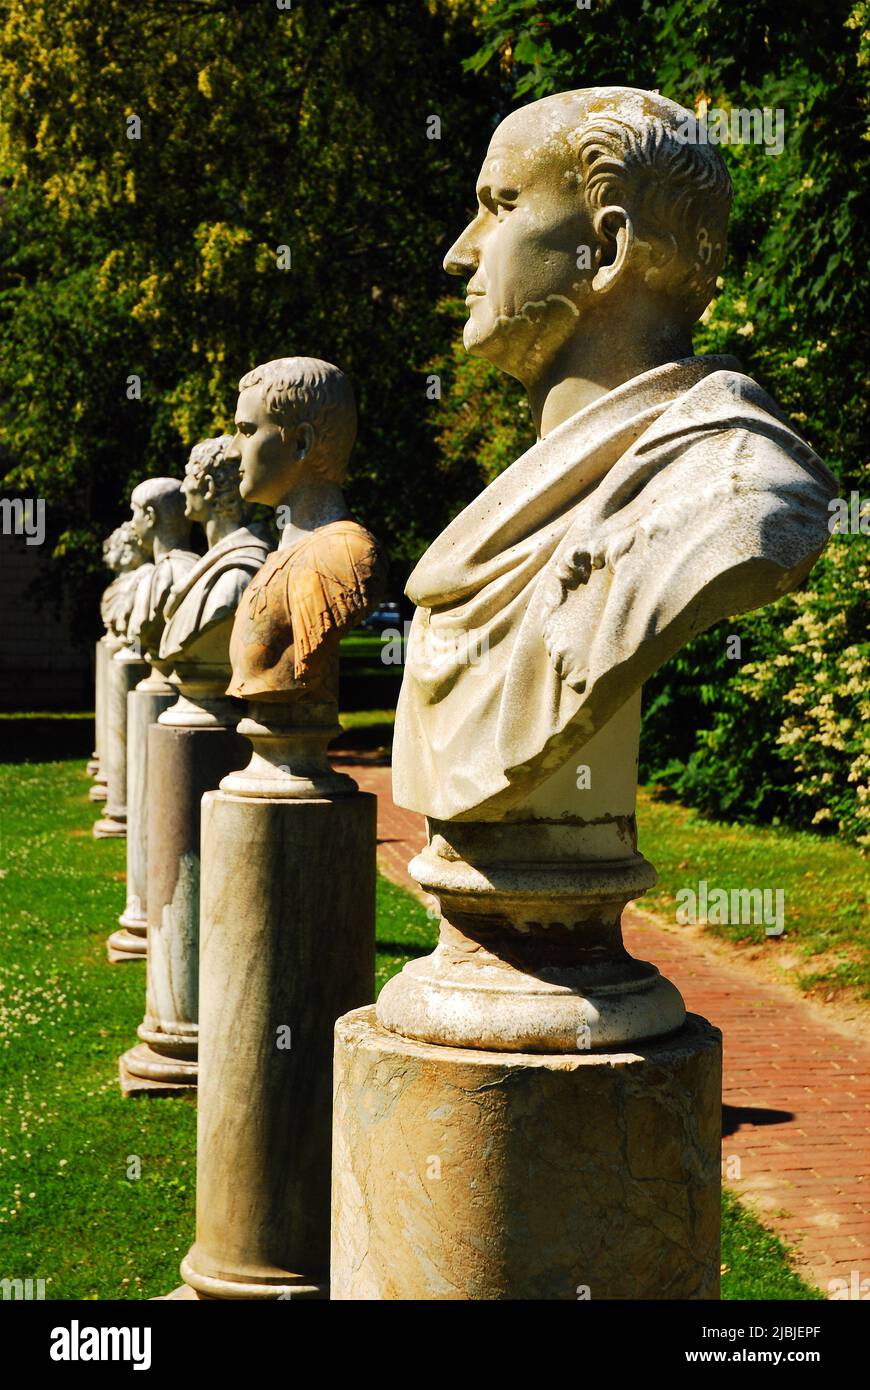 A row of Roman busts line a small courtyard at a museum in Southampton, in the Hamptons on Long Island, New York Stock Photo